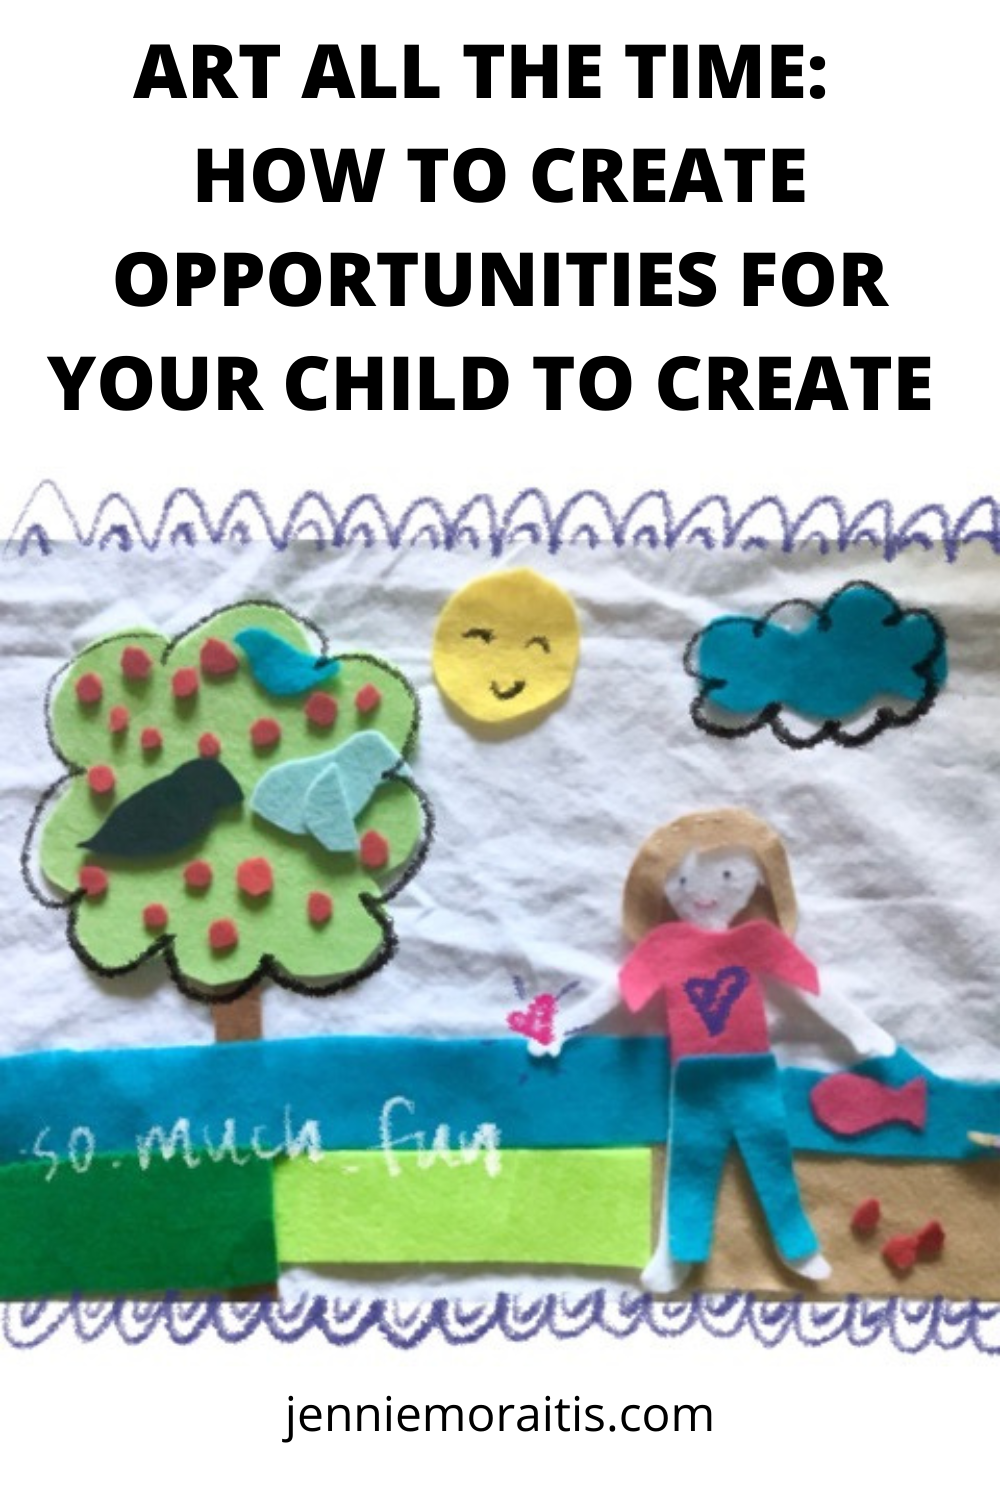 Art All The Time—Create Opportunities for Your Child to Create